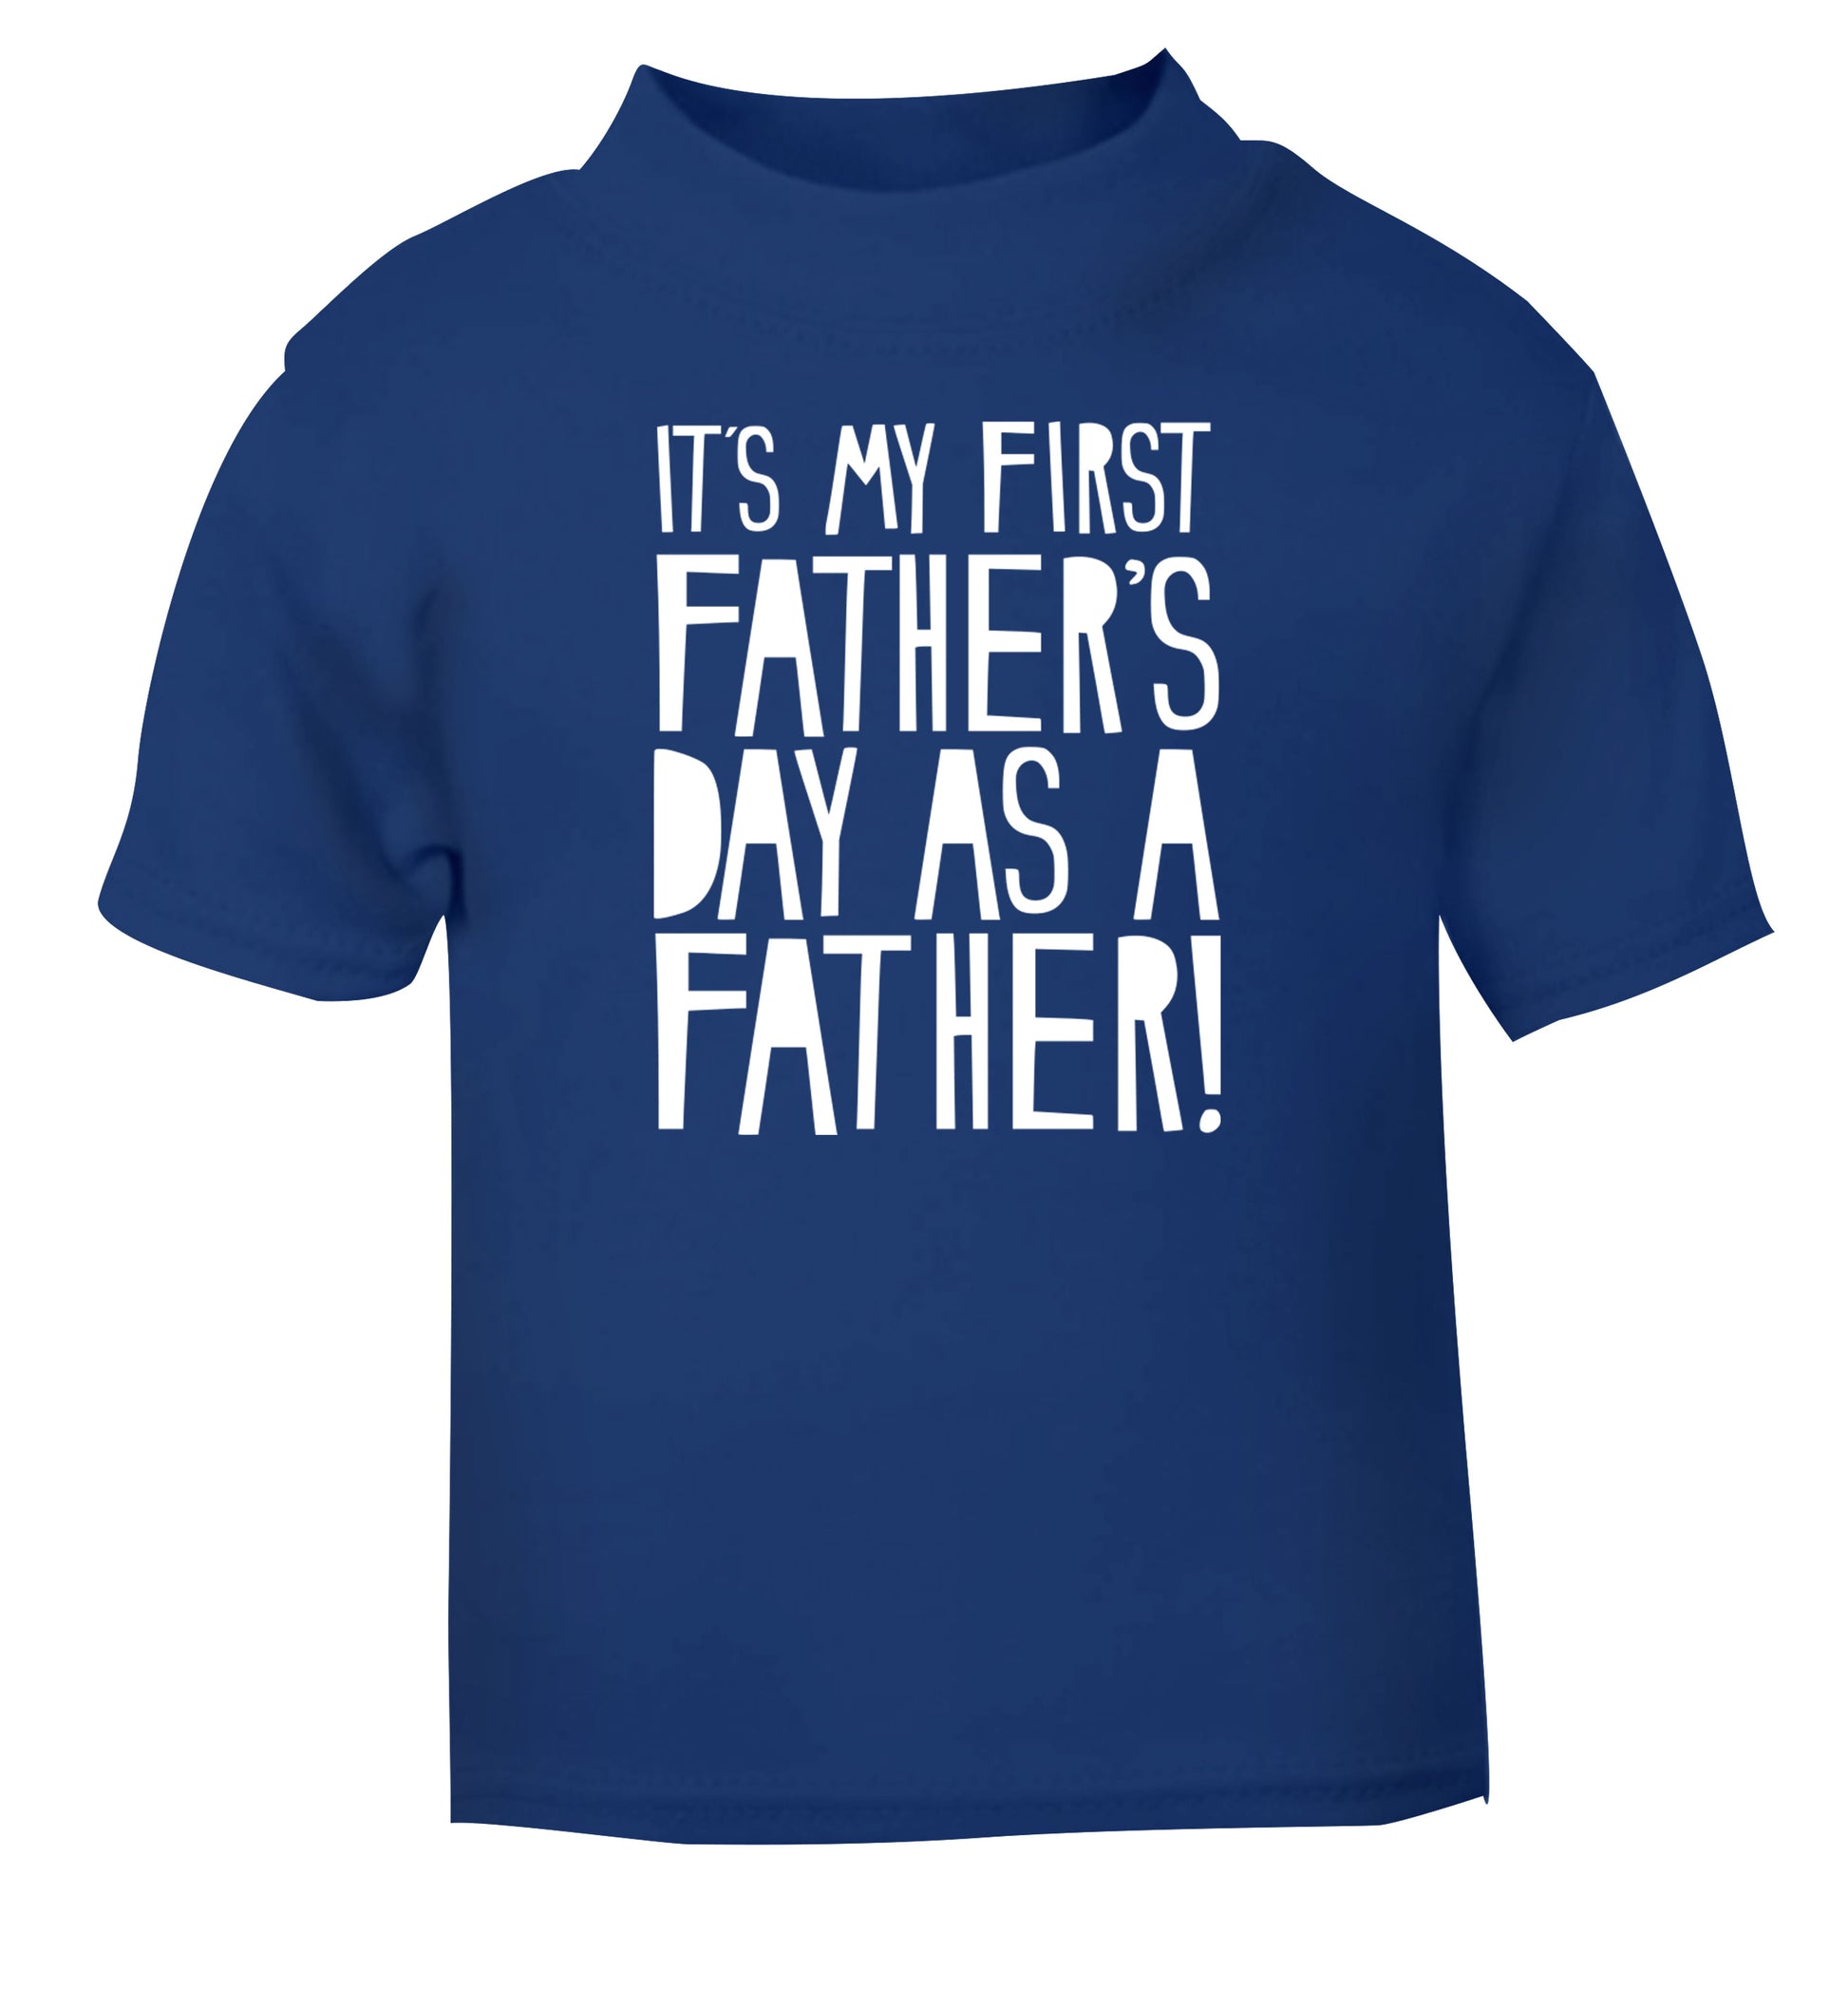 It's my first Father's Day as a father! blue Baby Toddler Tshirt 2 Years